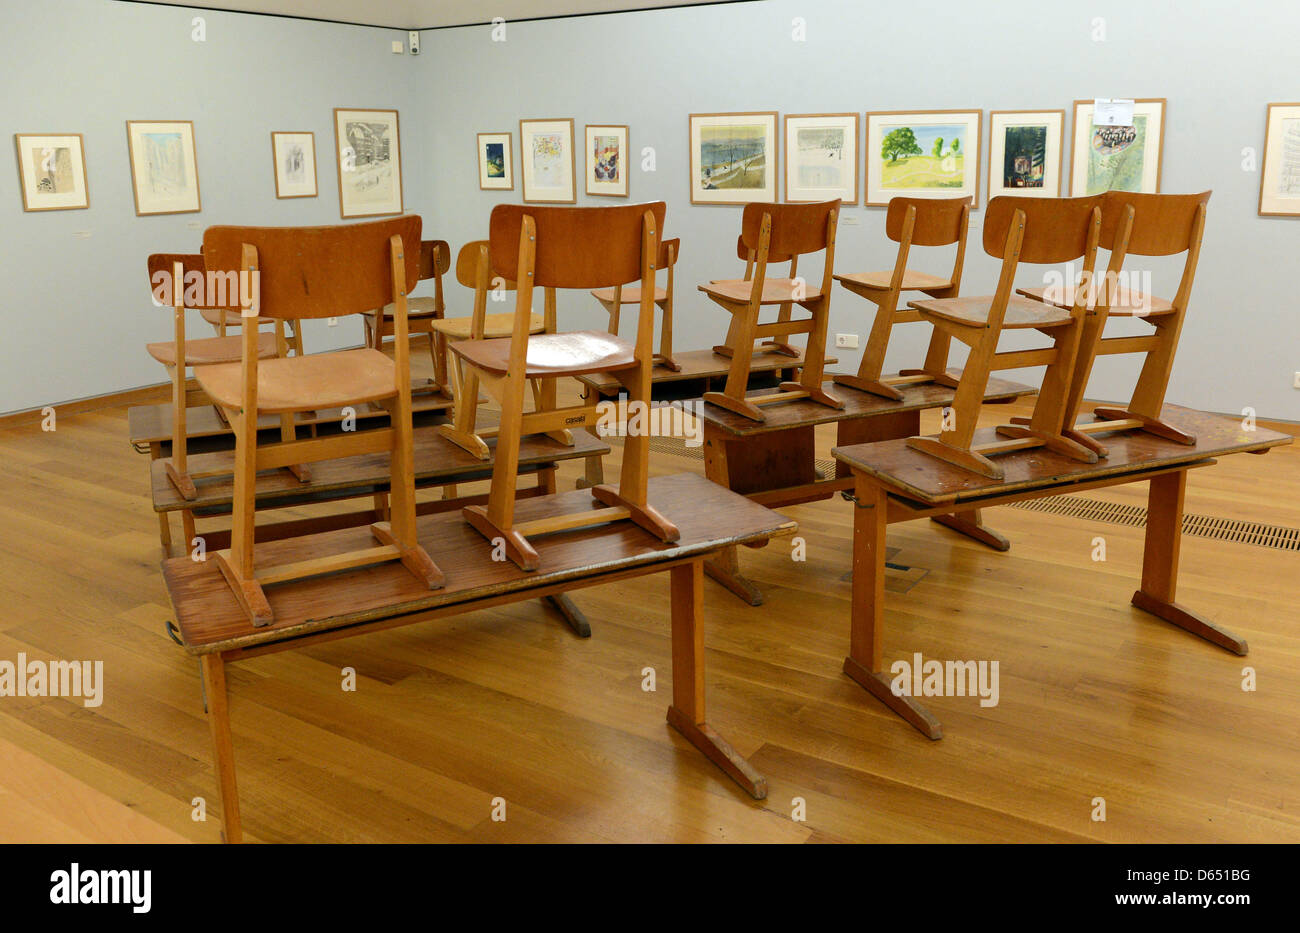 Old school desks are on display with pictures bay artist Jean-Jacques Sempe at the Wilhelm Busch Museum in Hanover, Germany, 08 June 2012. It is part of the exhibition for the 80th birthday of French illustrator Jean-Jacques Sempe. Photo: Peter Steffen Stock Photo